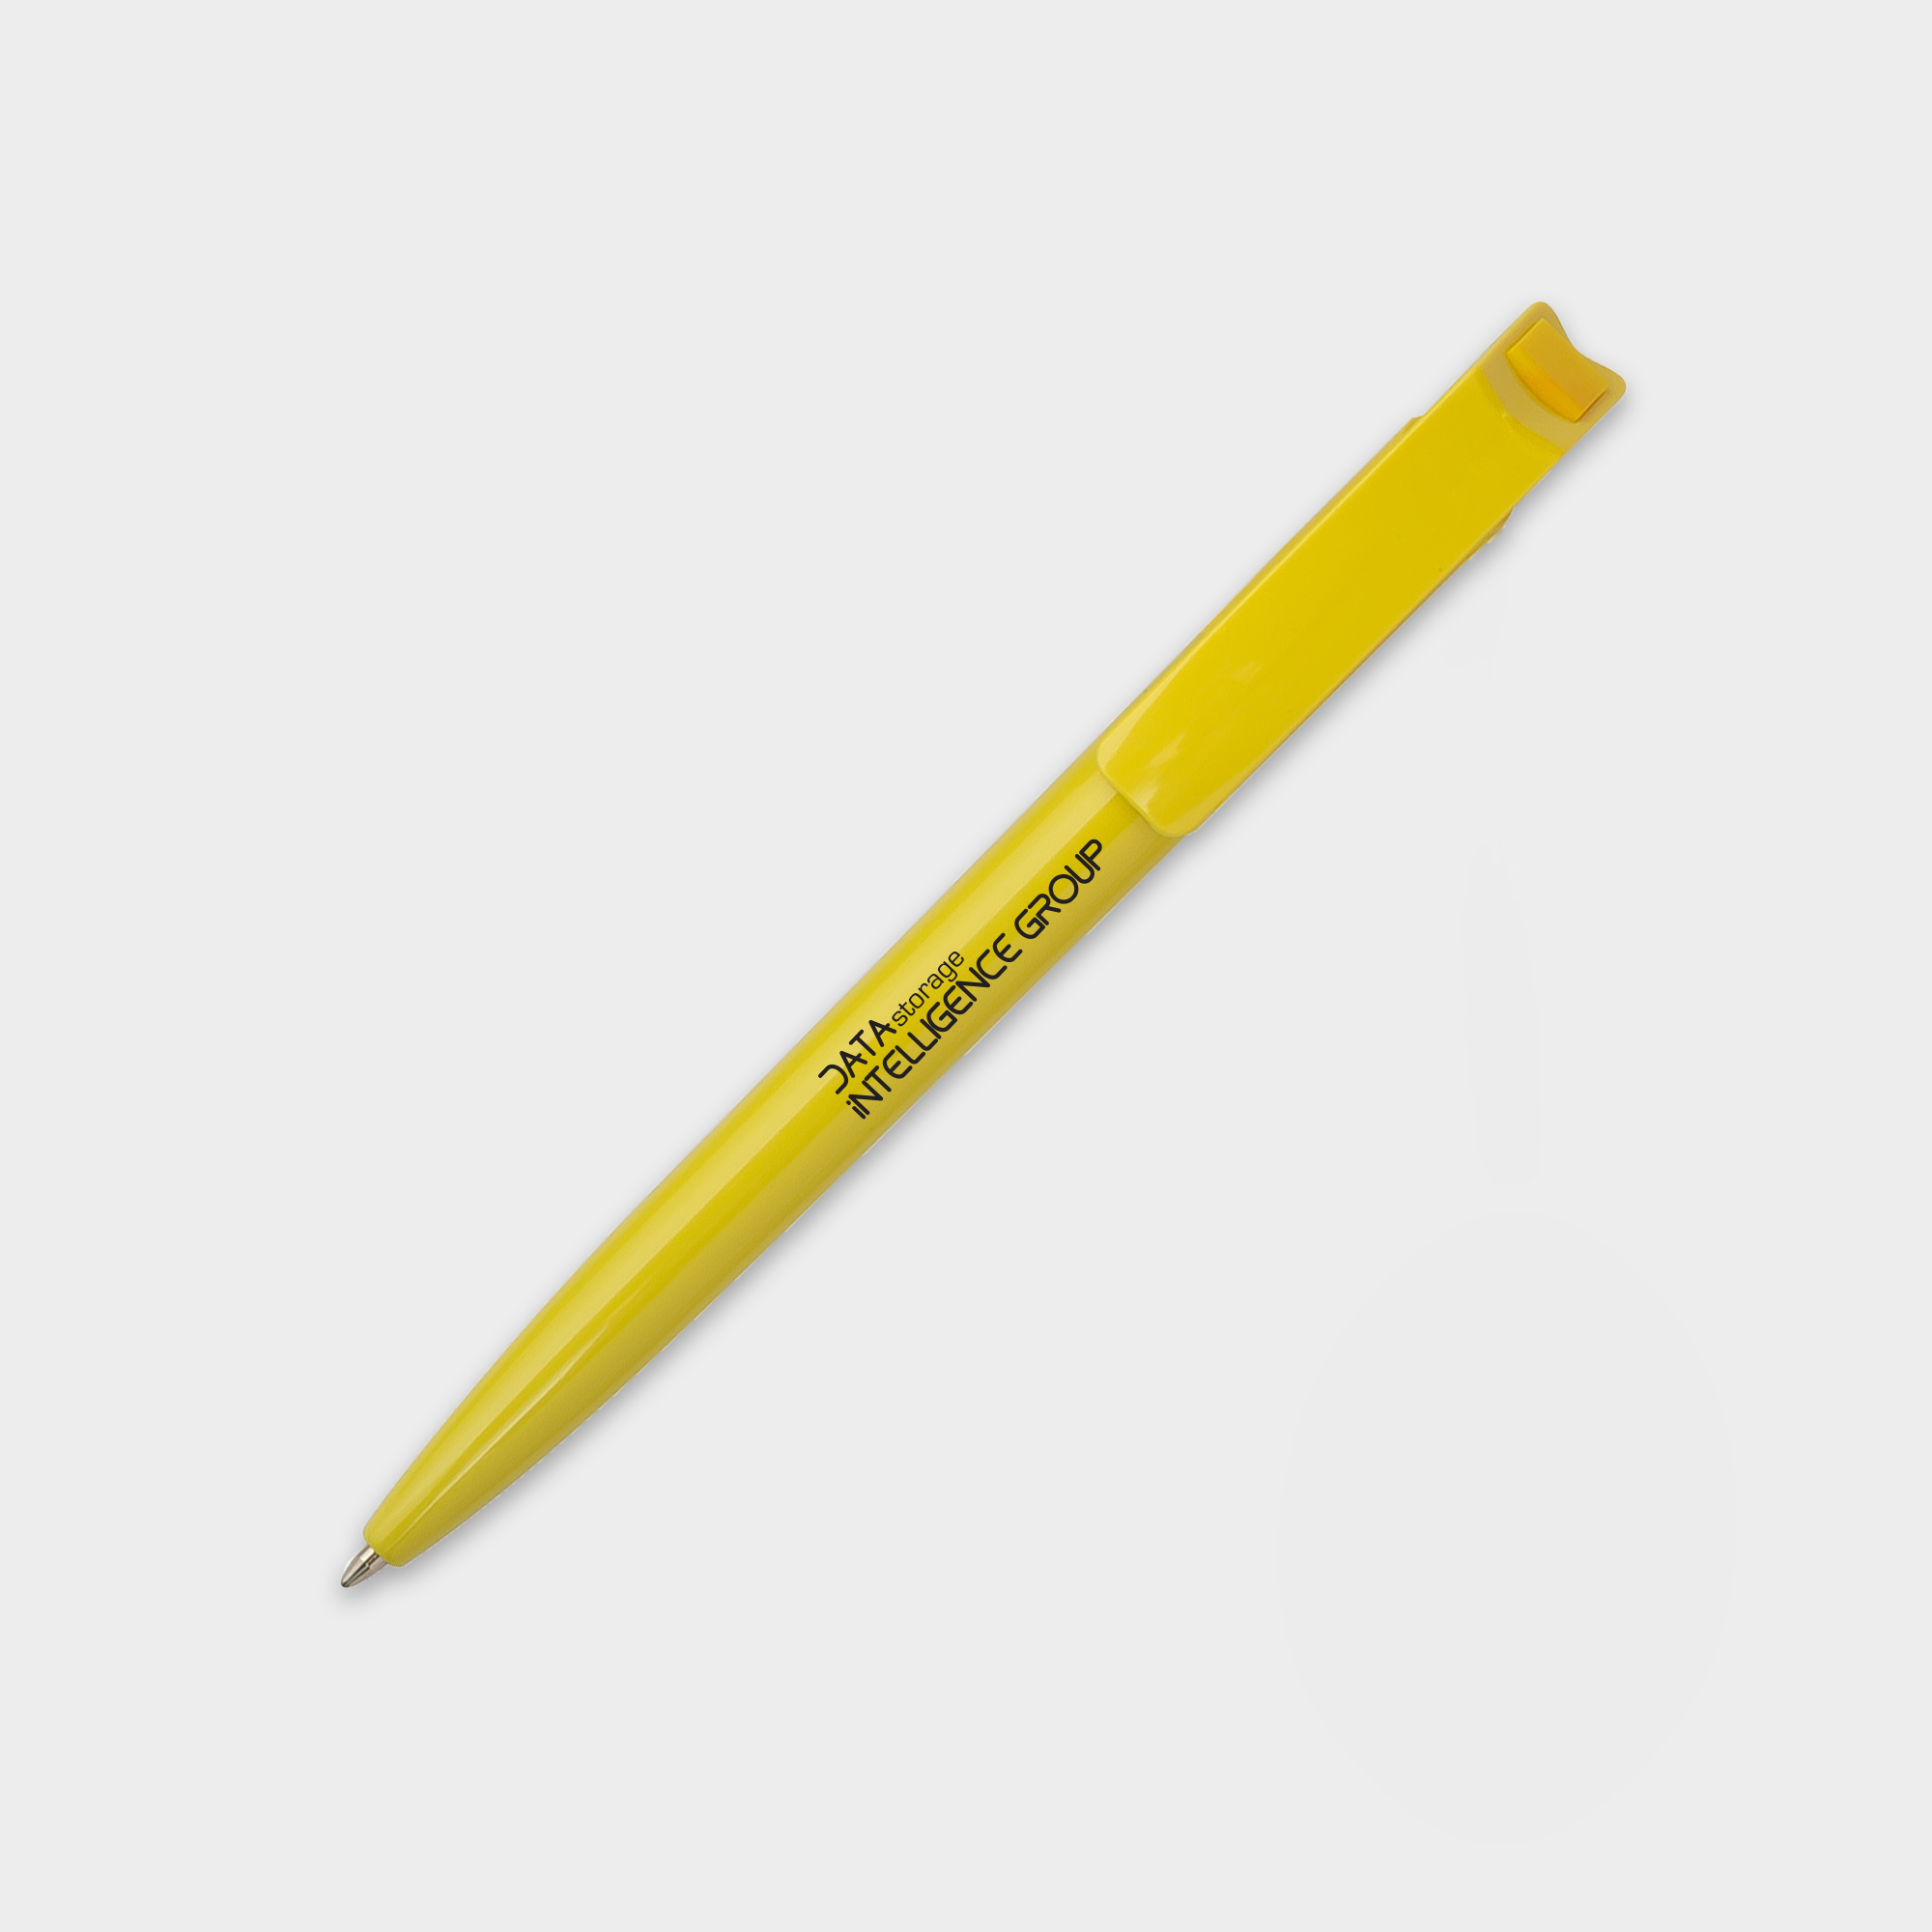 The Green & Good Litani Pen. An eco-friendly and high-quality pen made from recycled plastic bottles (rPET) with black ink refills and a solid colour body. Made in the EU and available in a variety of colours. Yellow